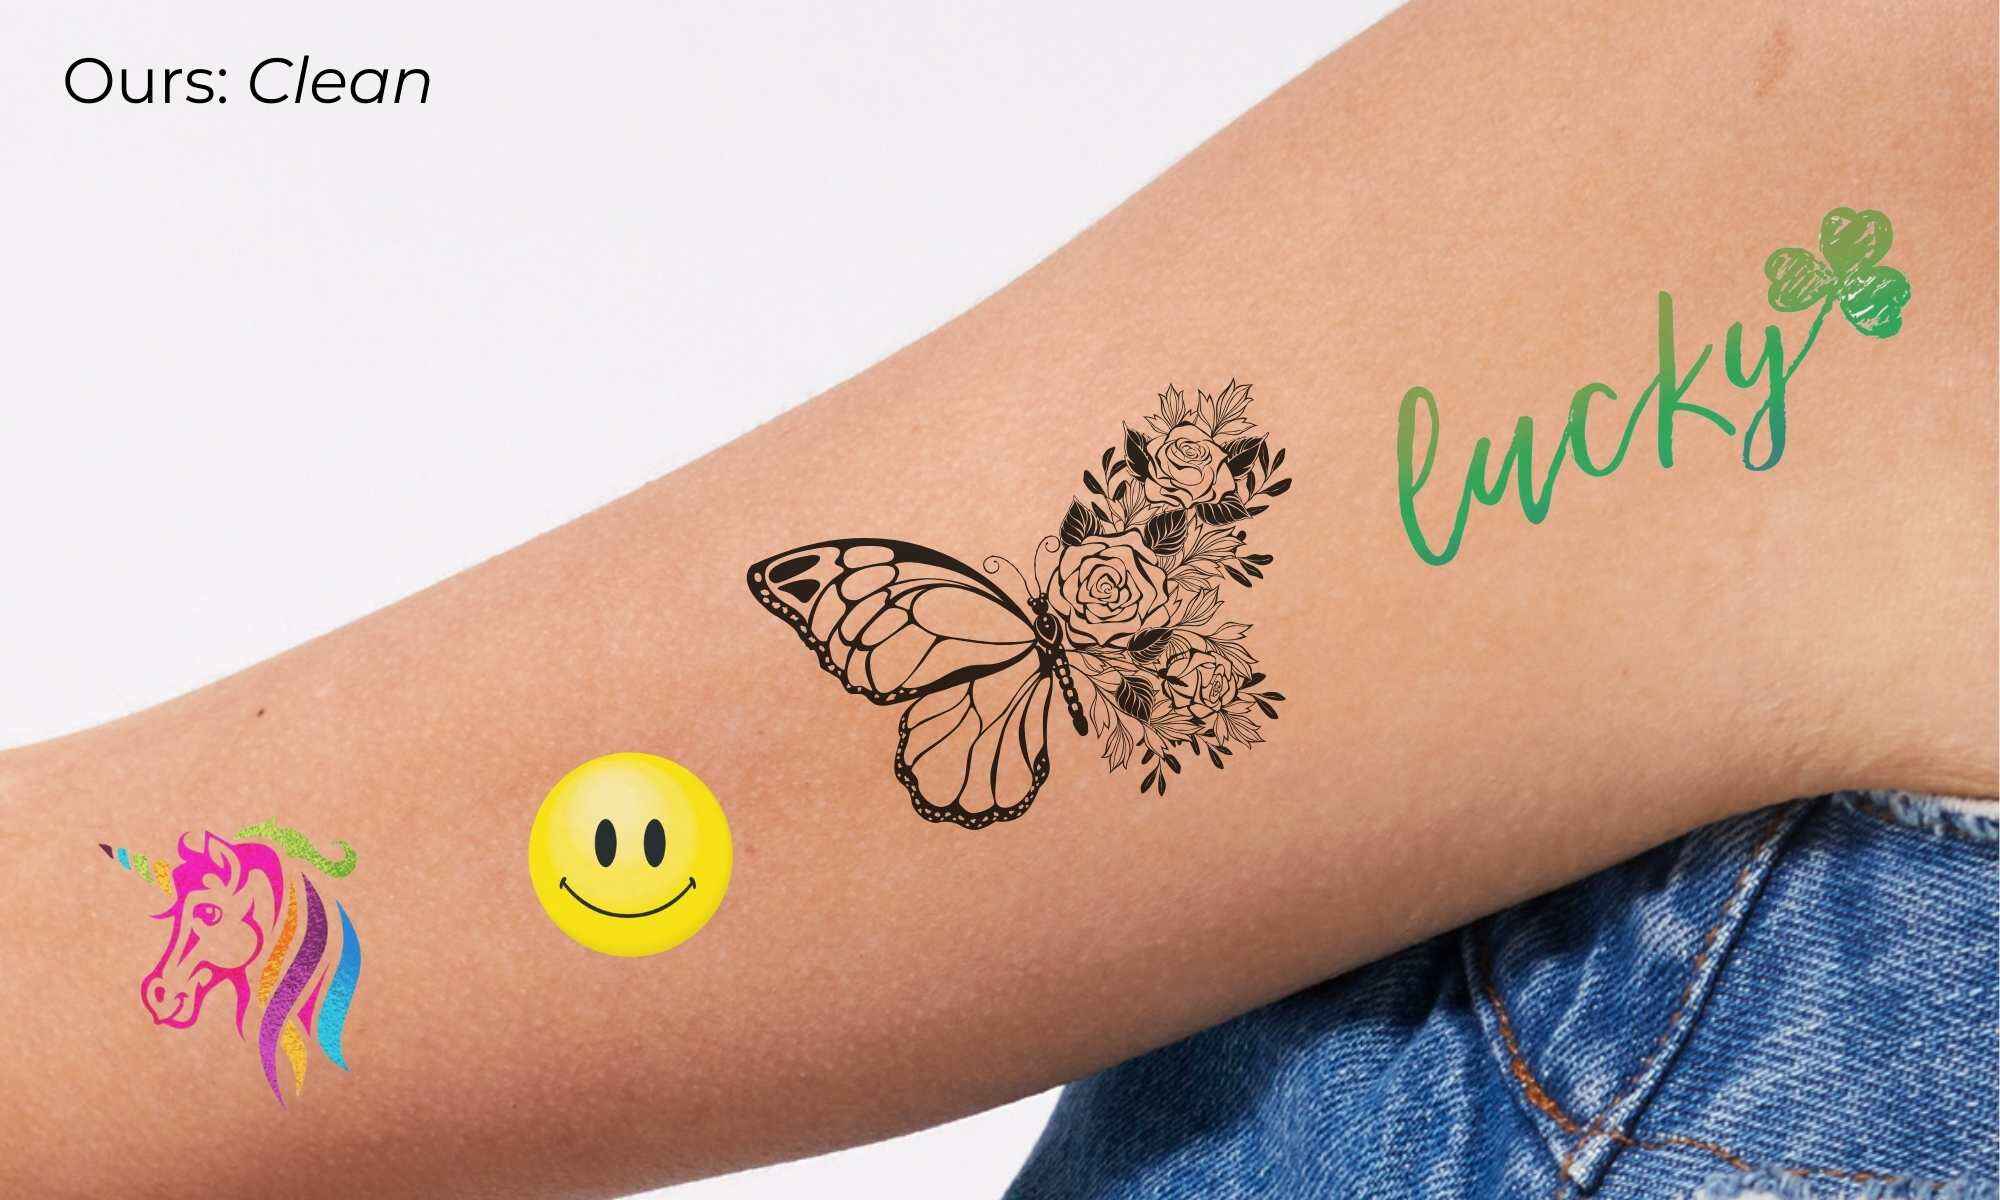 30 Temporary Tattoos Realistic English Words Fake Waterproof Stickers  Letters | eBay